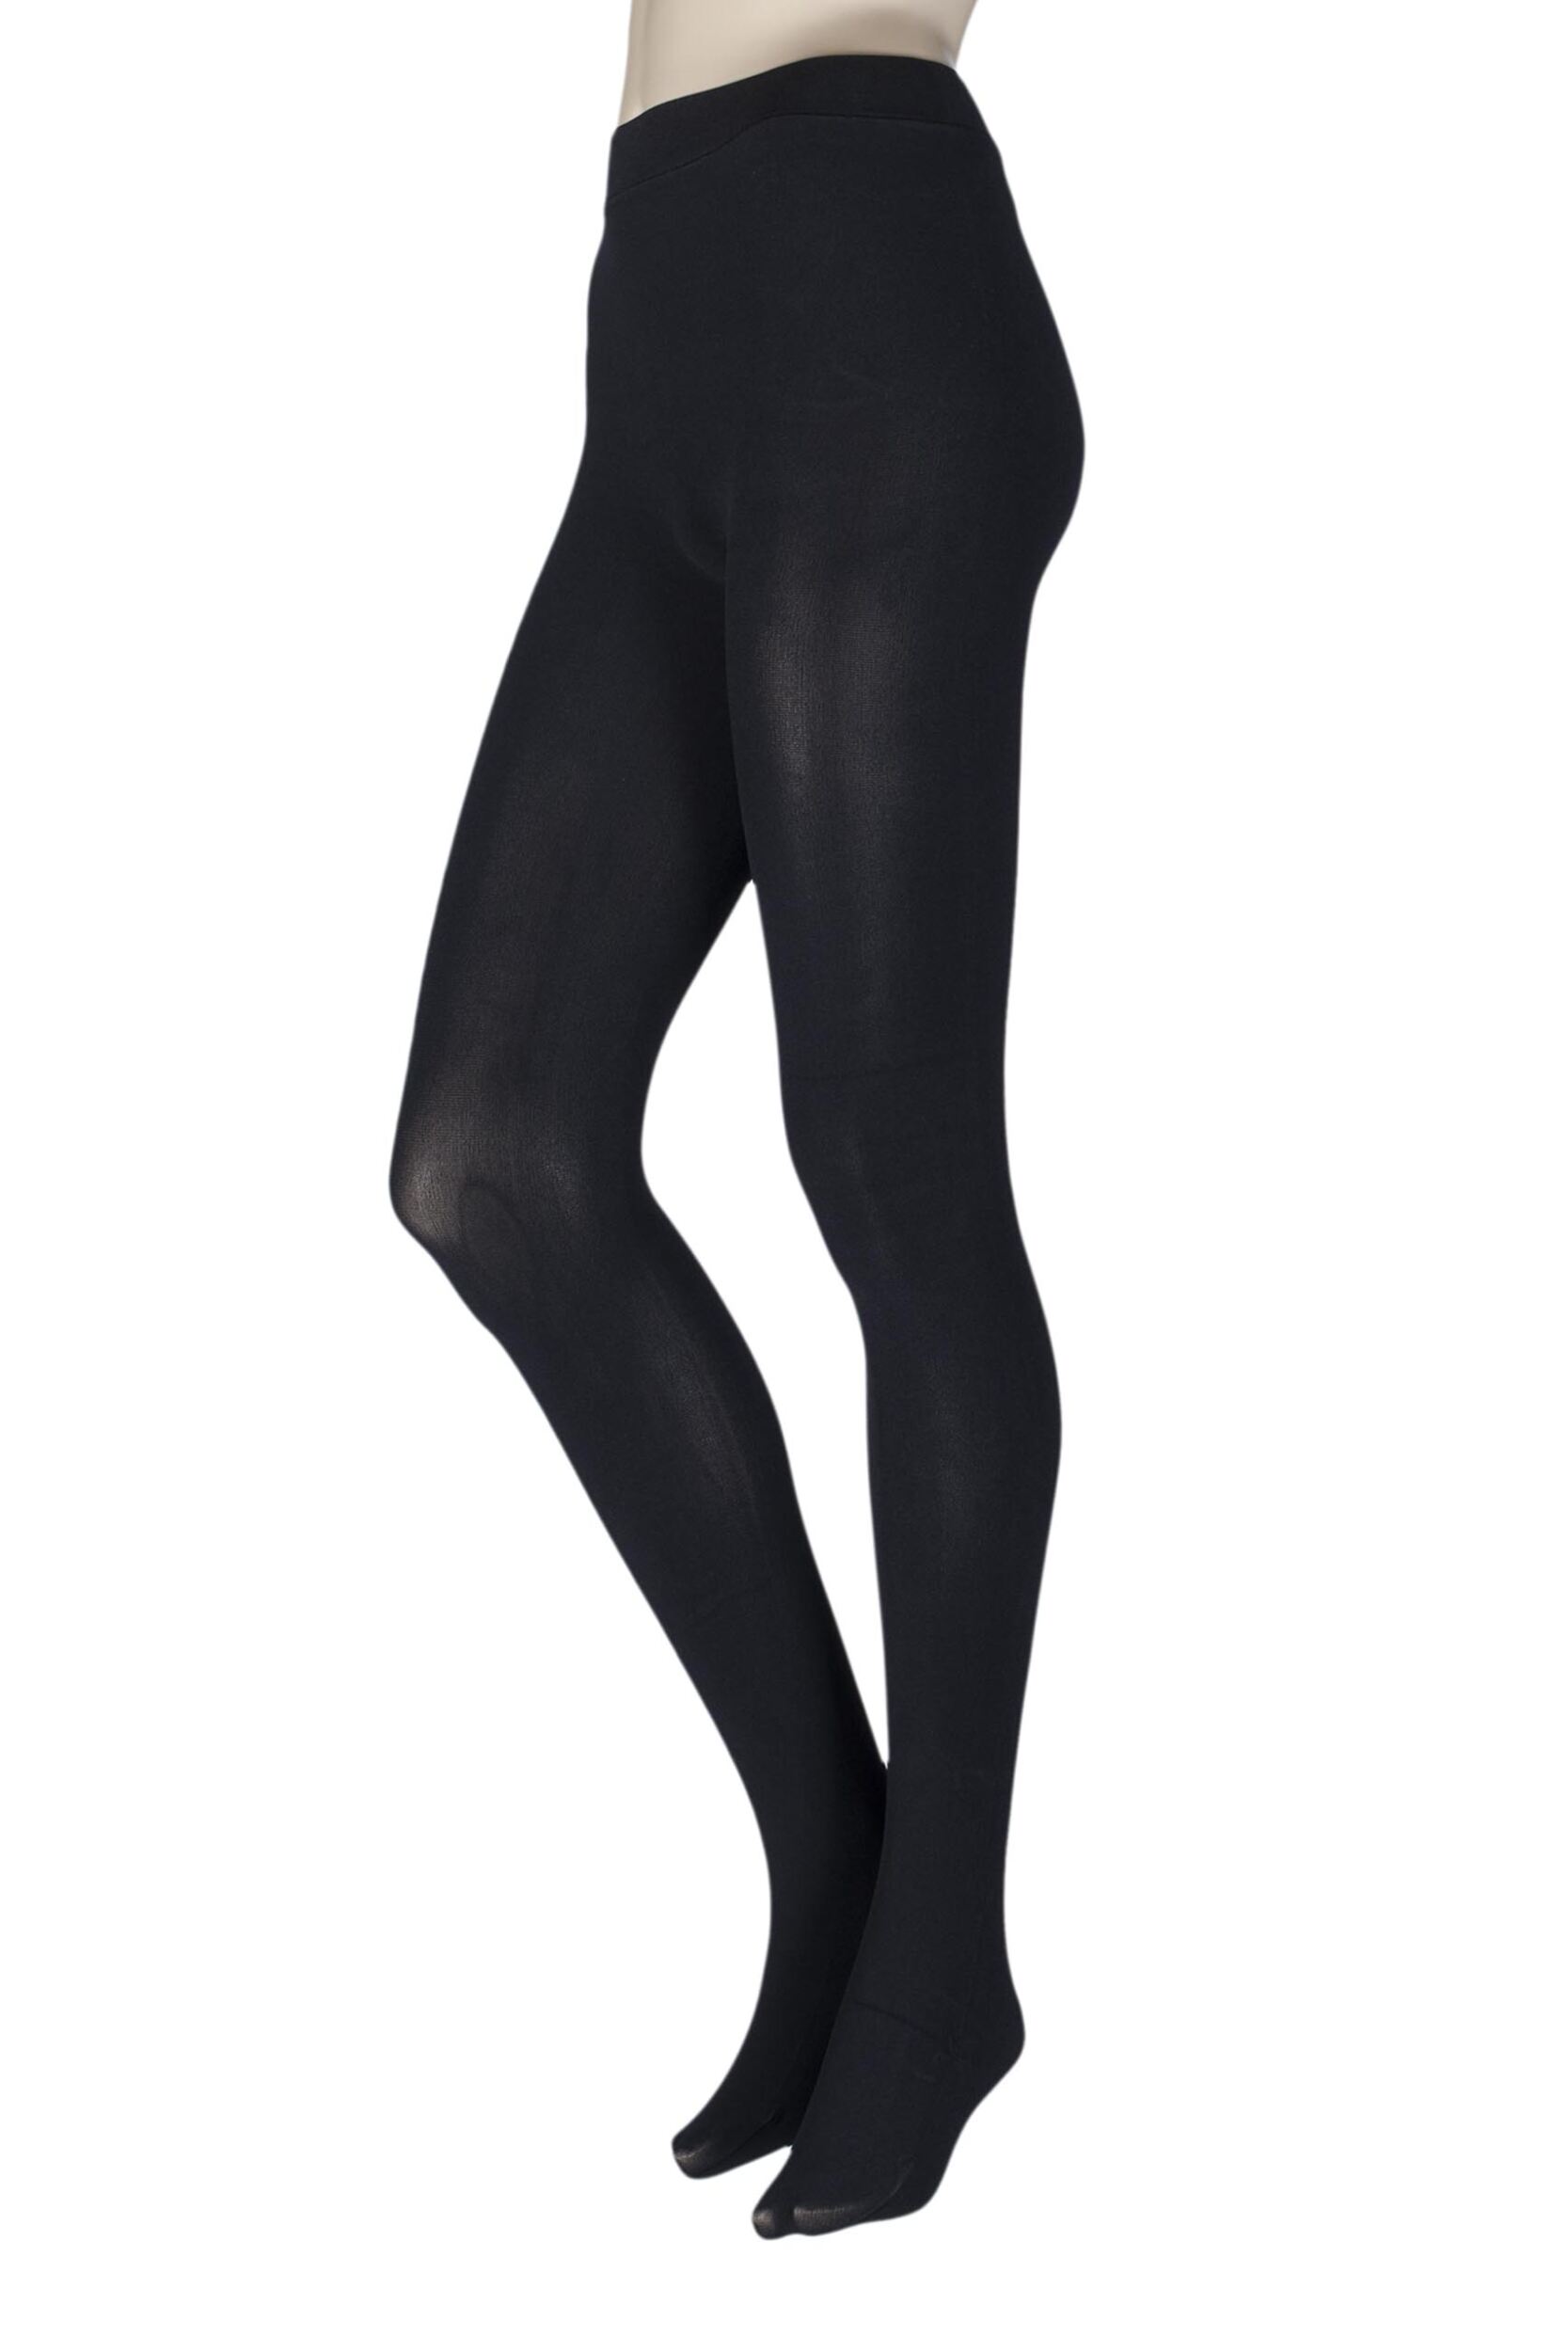 Image of Ladies 1 Pair Couture by Silky Ultimates Seamless and Ladder Proof 100 Denier Opaque Tights